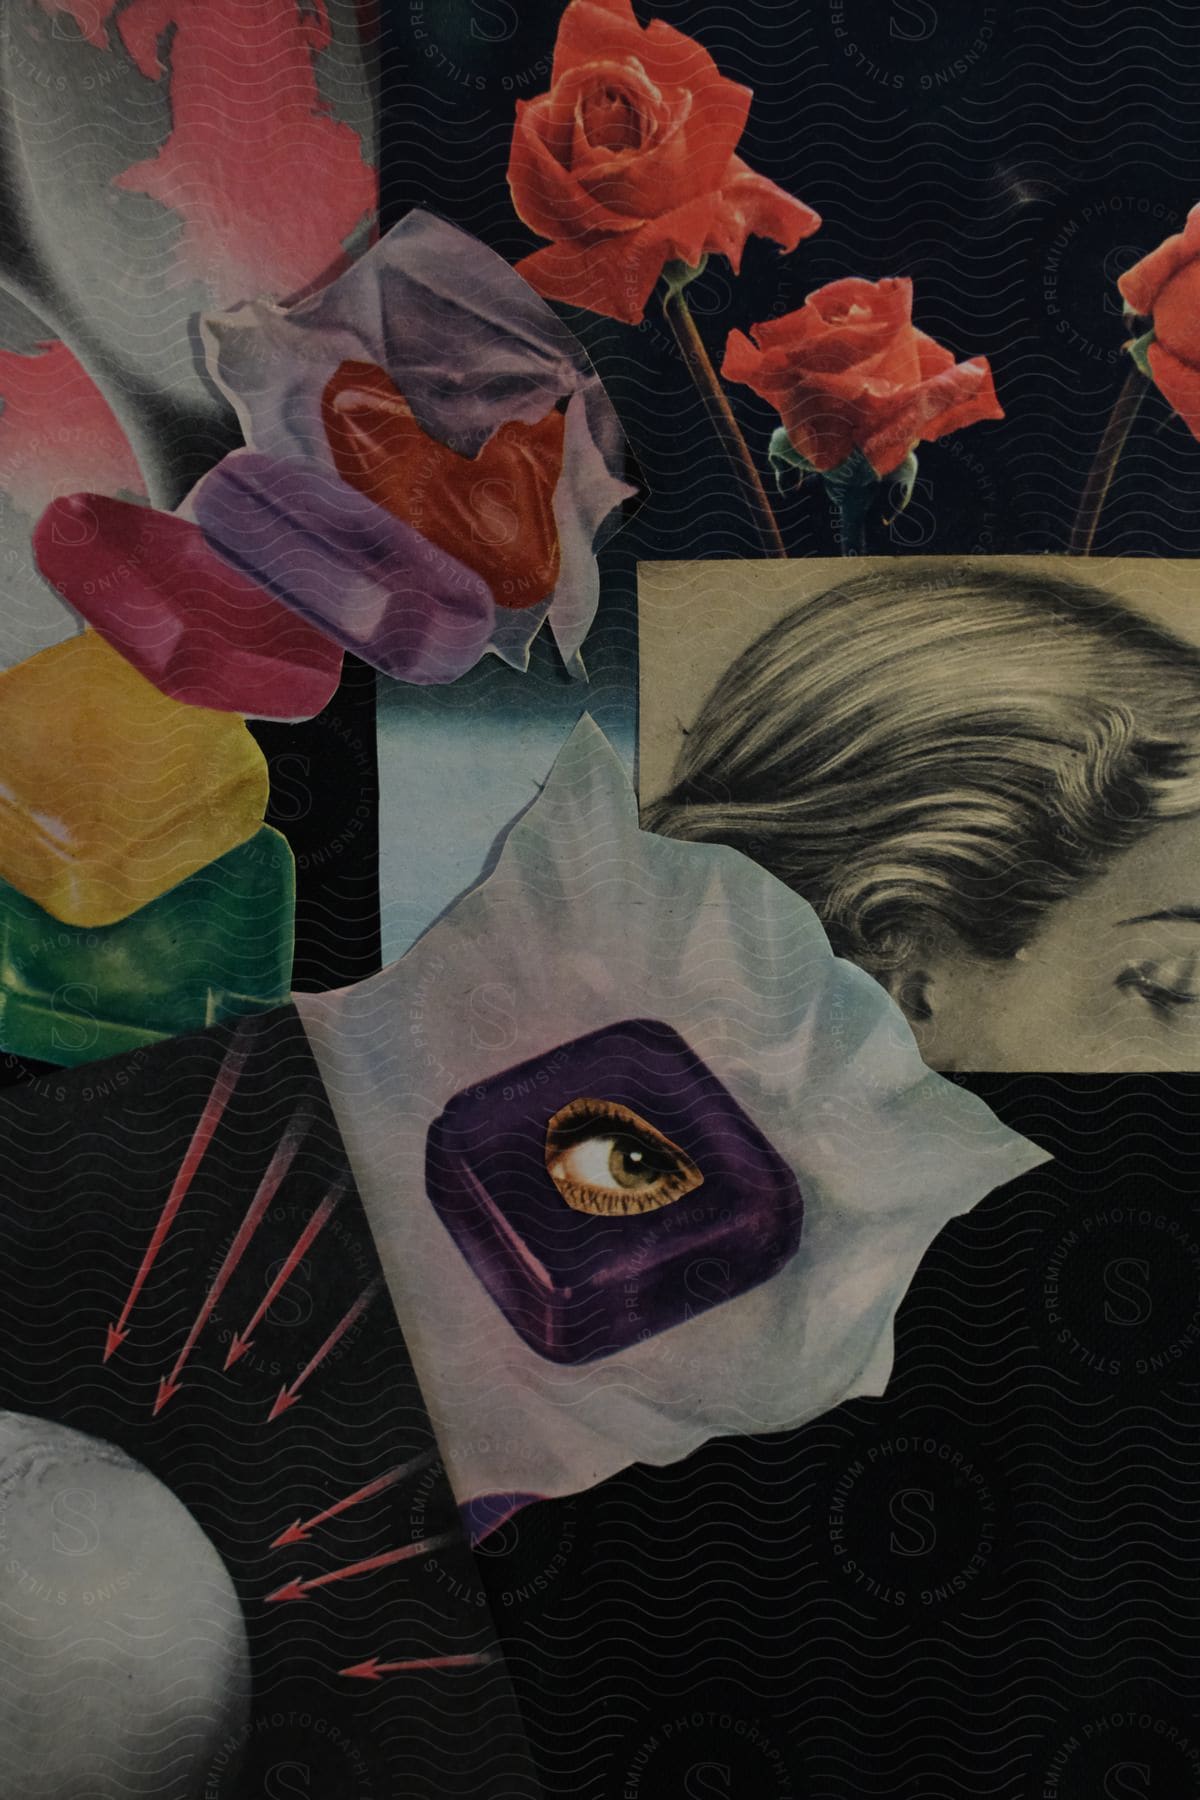 A painting of candies, one of them with an eye on it, as well as roses, arrows and a woman's hair.